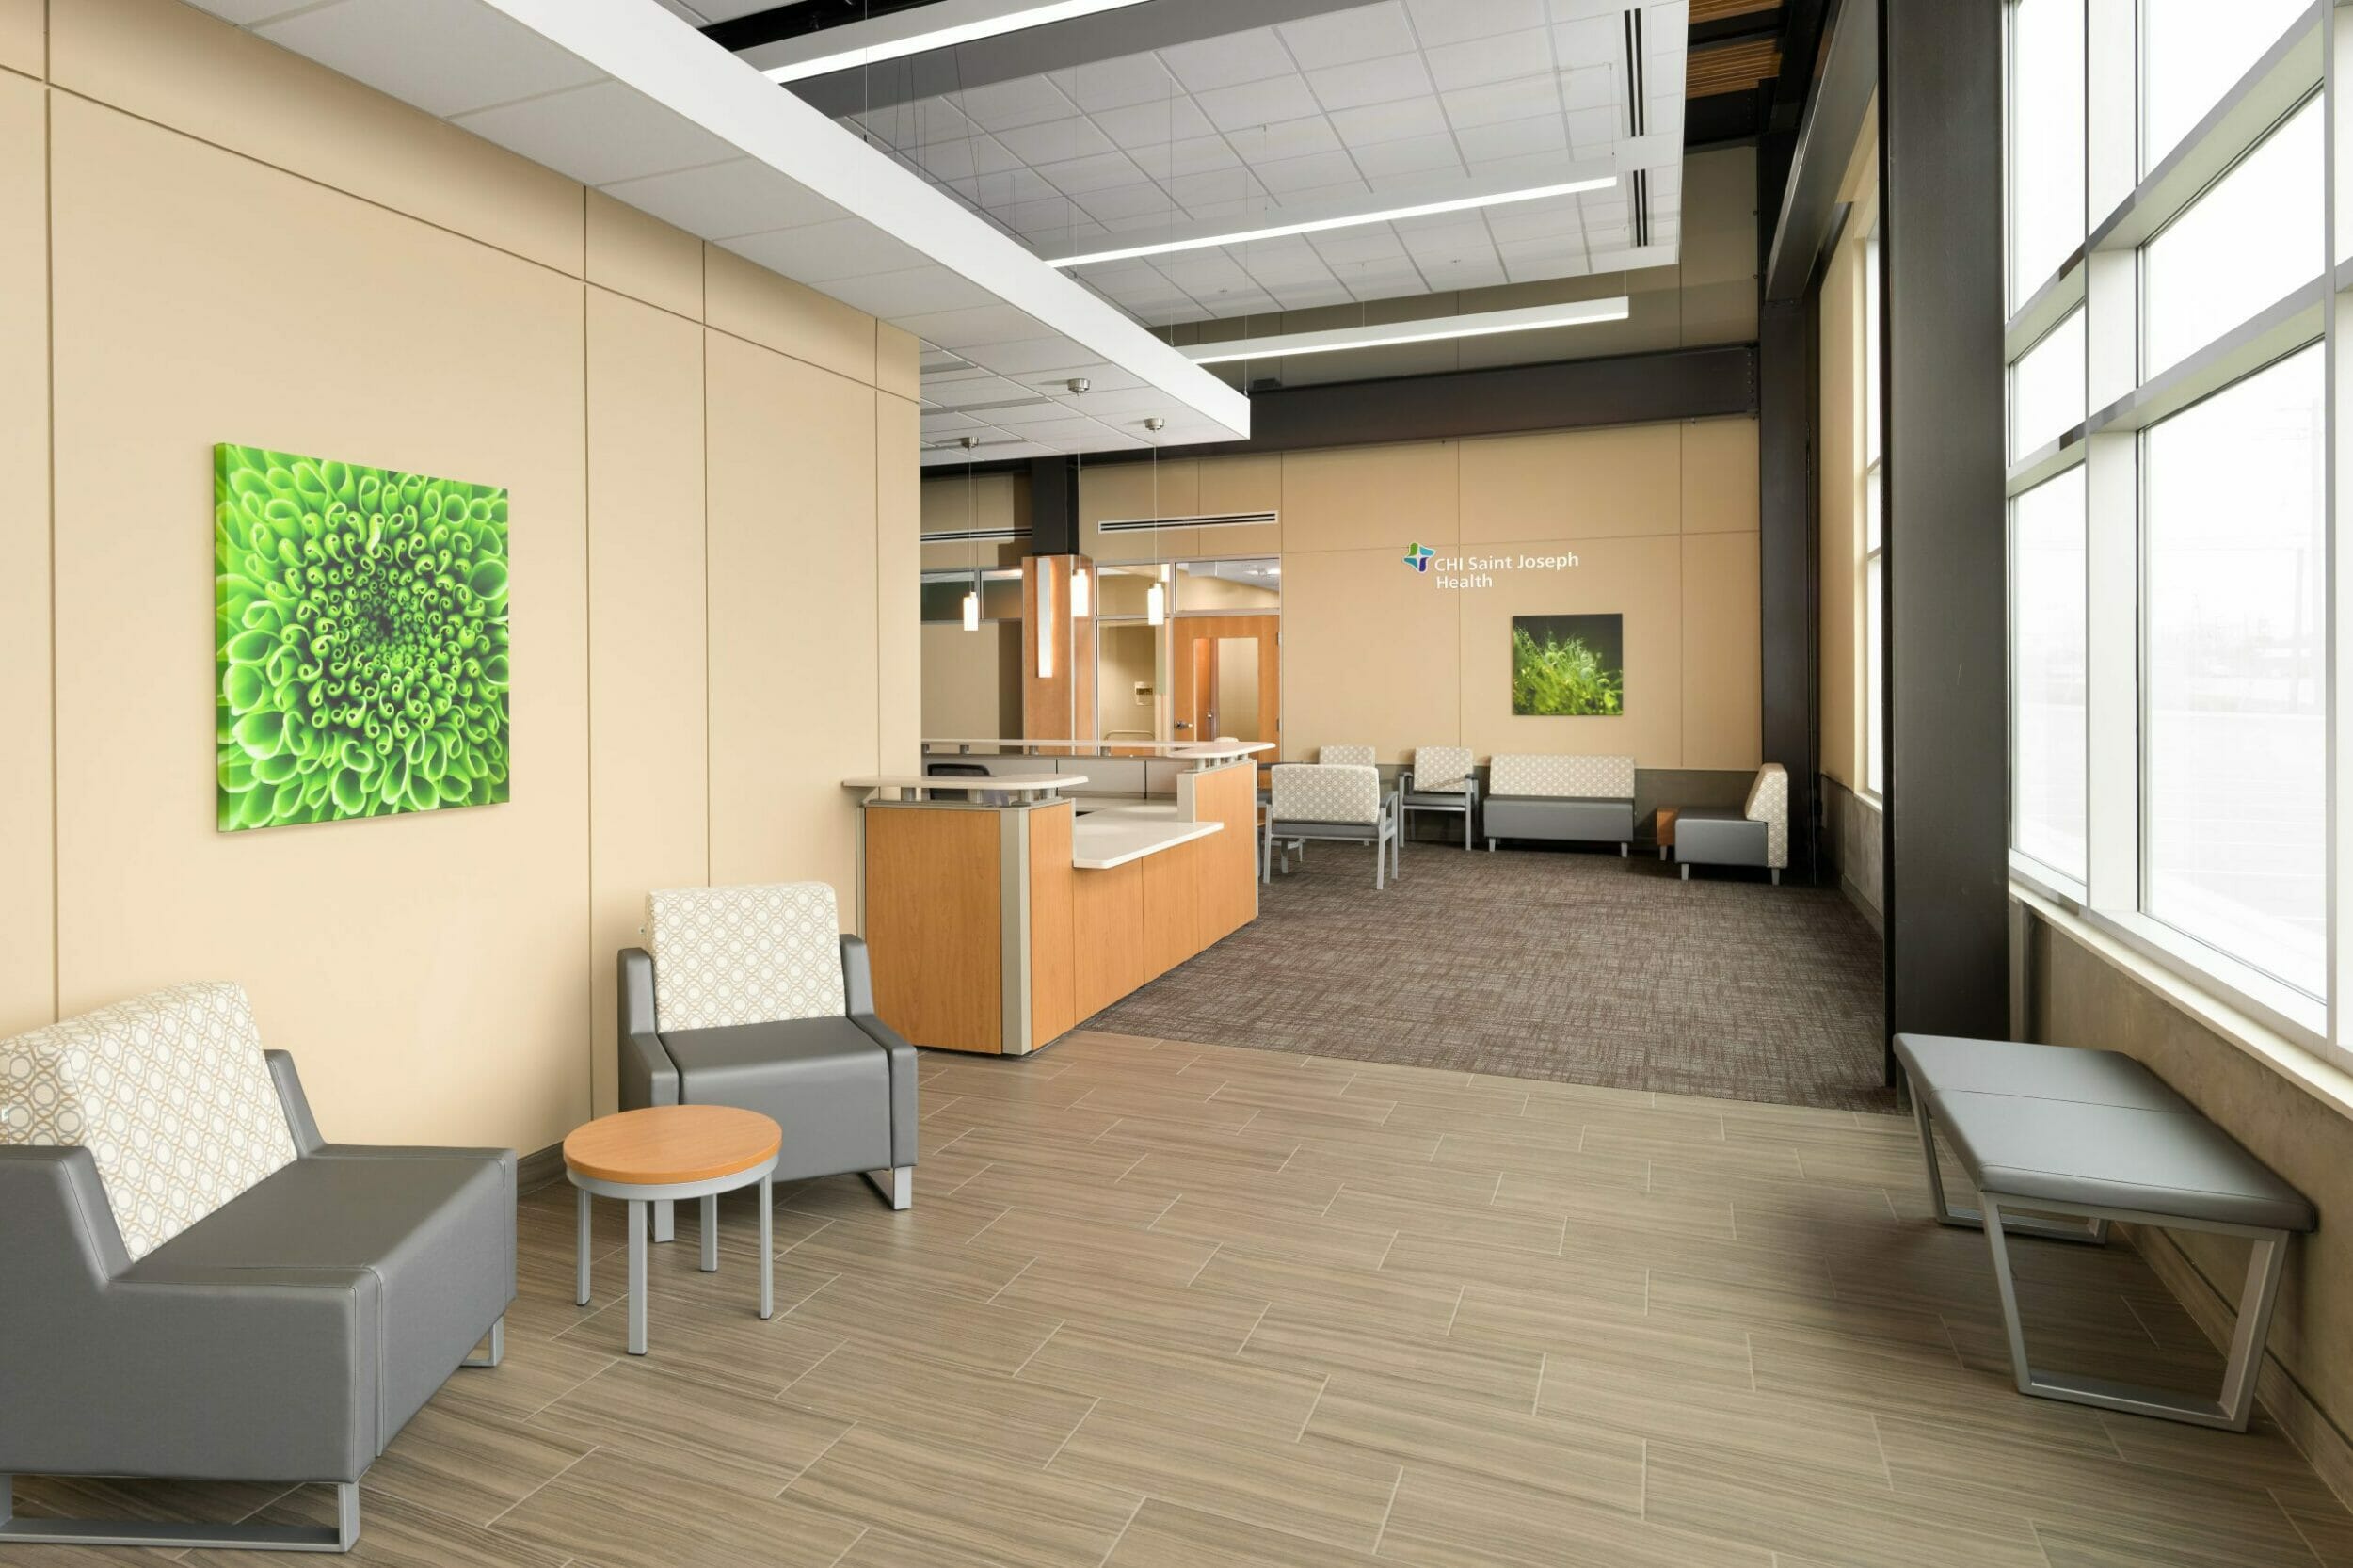 CHI Saint Joseph Health waiting room and fronk desk with multiple seating areas, tile and carpeted floors, and light wood walls